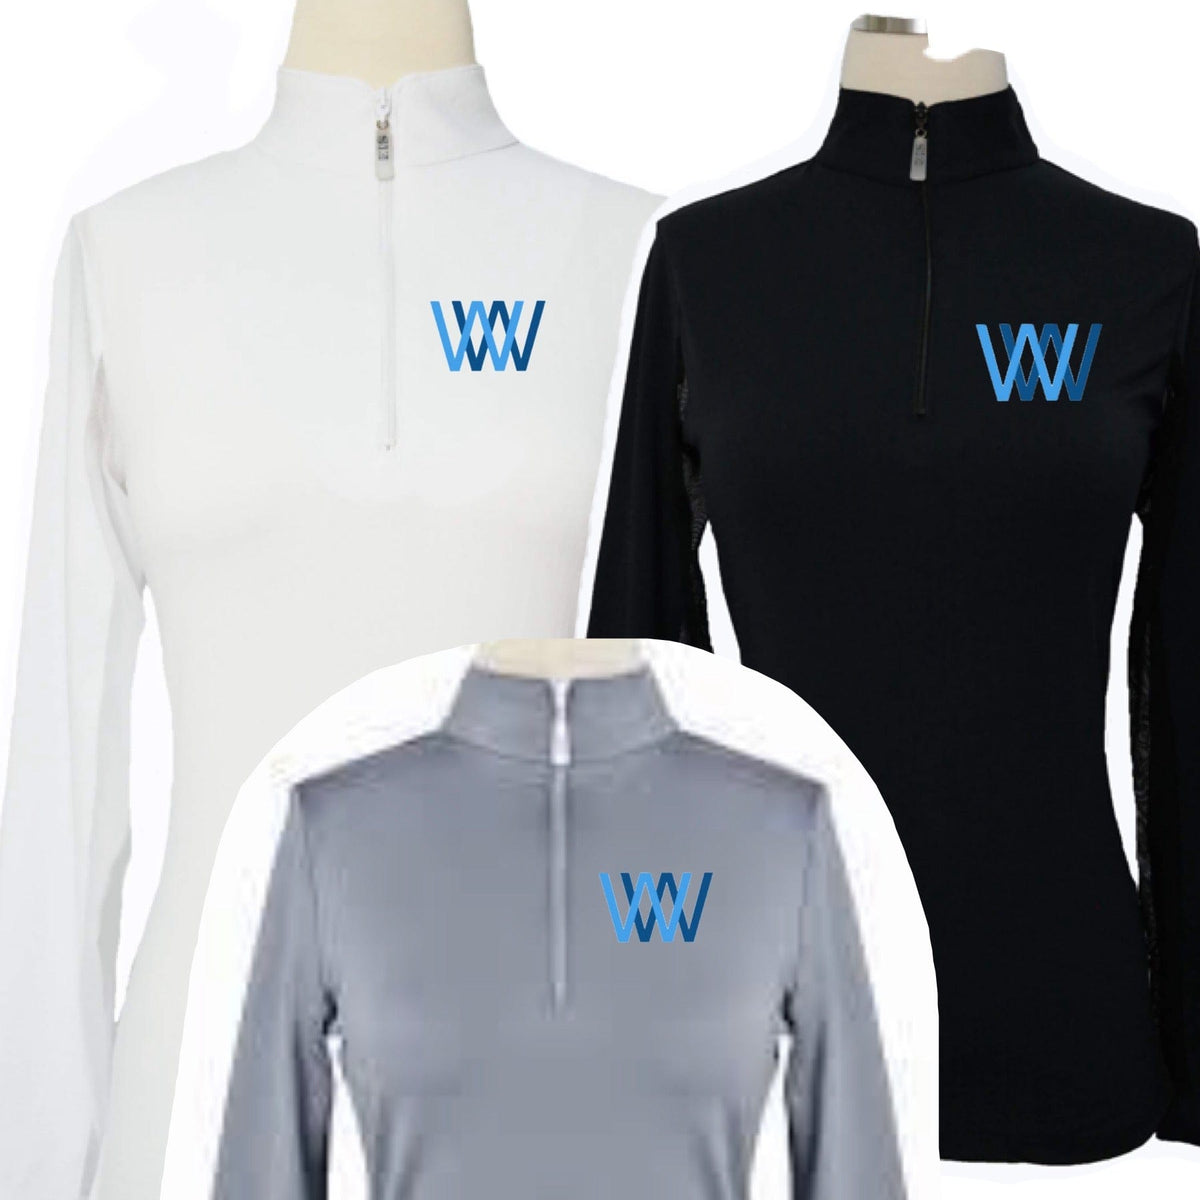 Equestrian Team Apparel Double W Farms Ladies Sun Shirt equestrian team apparel online tack store mobile tack store custom farm apparel custom show stable clothing equestrian lifestyle horse show clothing riding clothes horses equestrian tack store